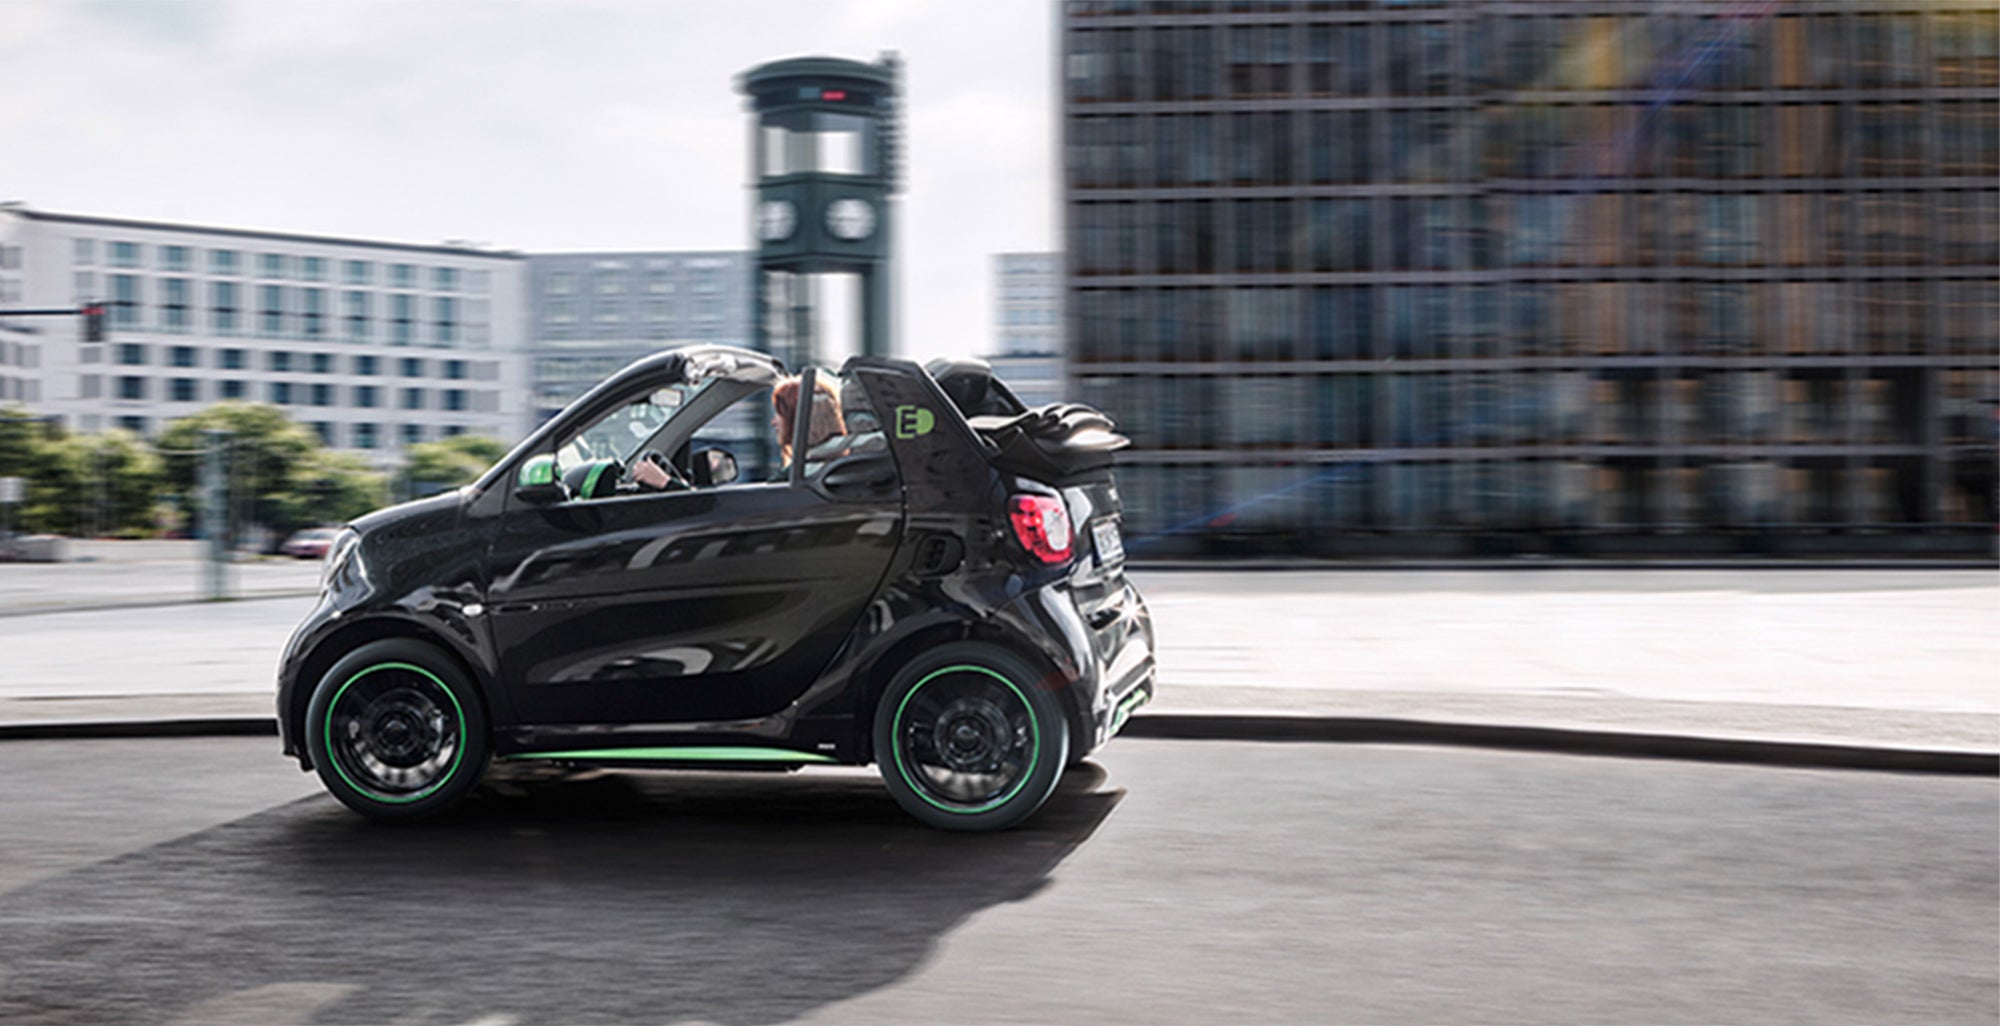 What the experts say about the 2017 Smart Fortwo Electric Drive Cabriolet